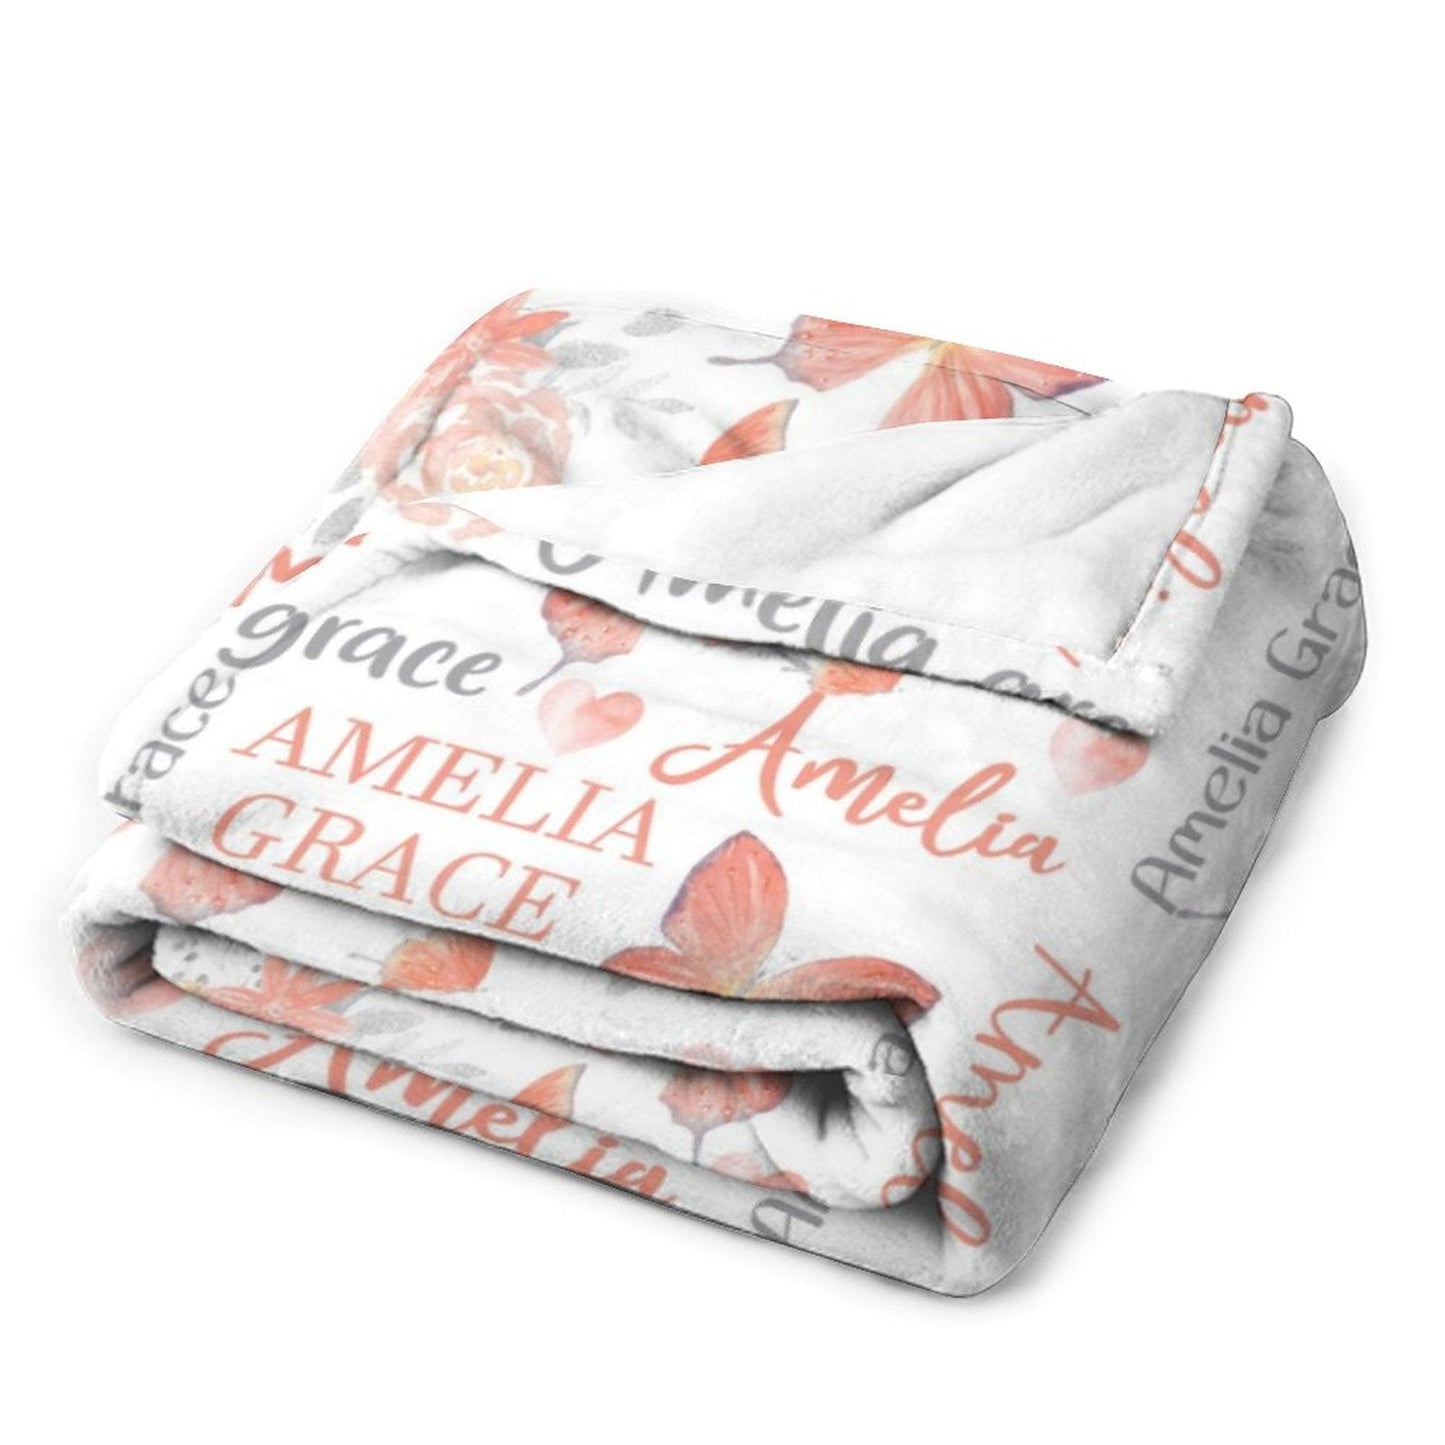 ️Personalized Butterfly Coral Floral Baby Girl Name Blanket